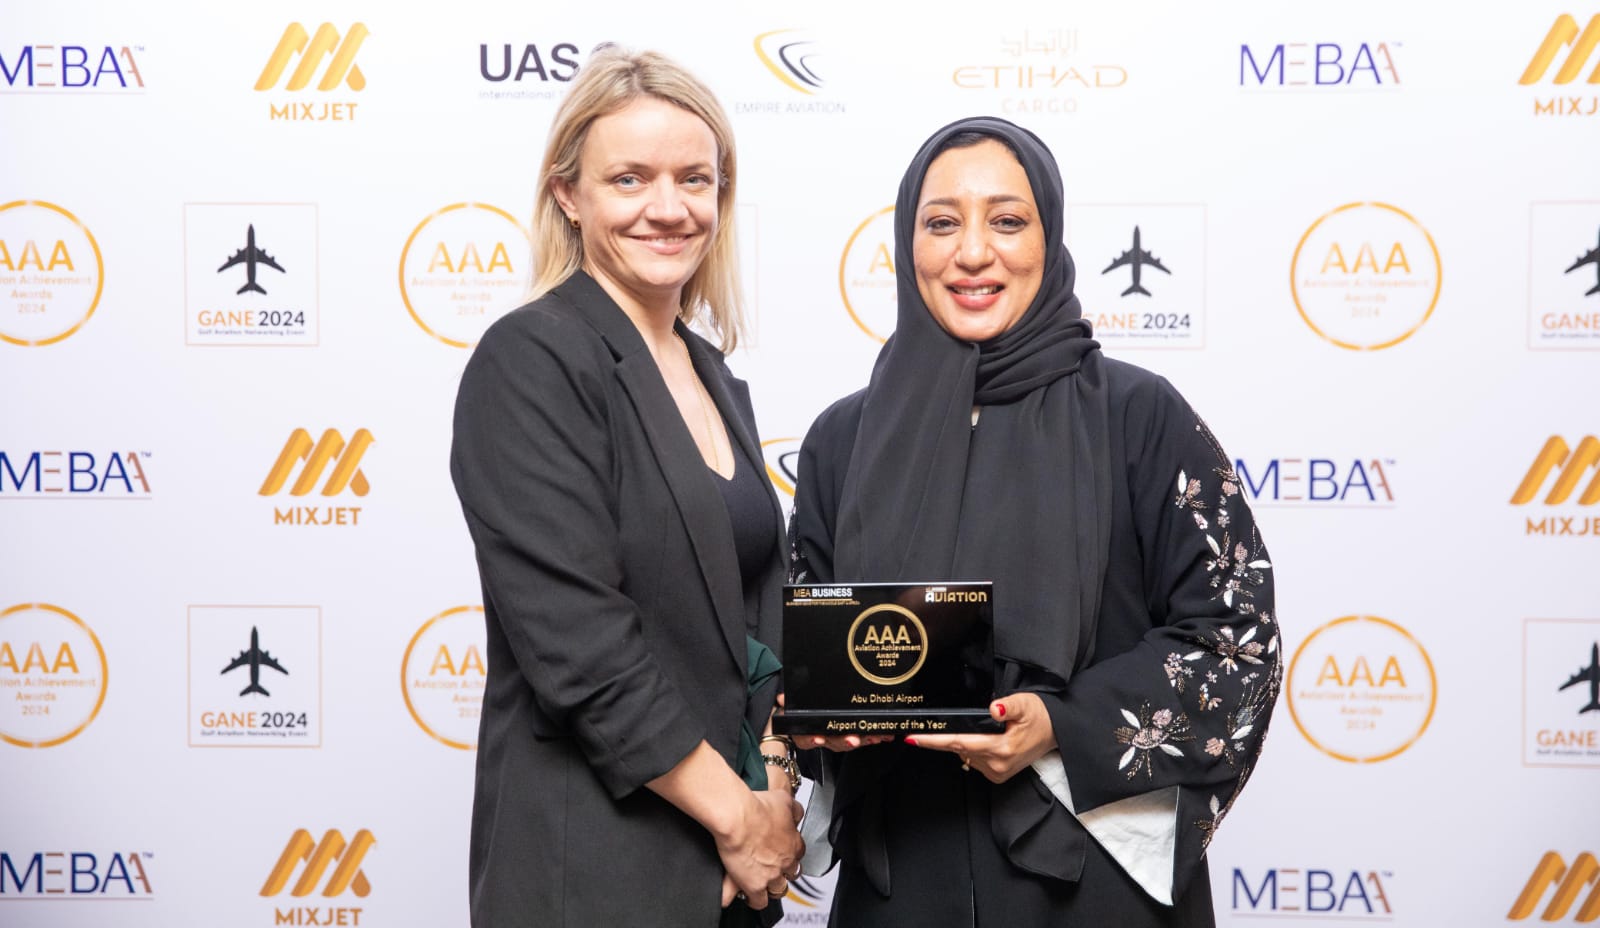 Abu Dhabi Airports Wins “Airport Operator of the Year” Award at Aviation Achievement Awards 2024